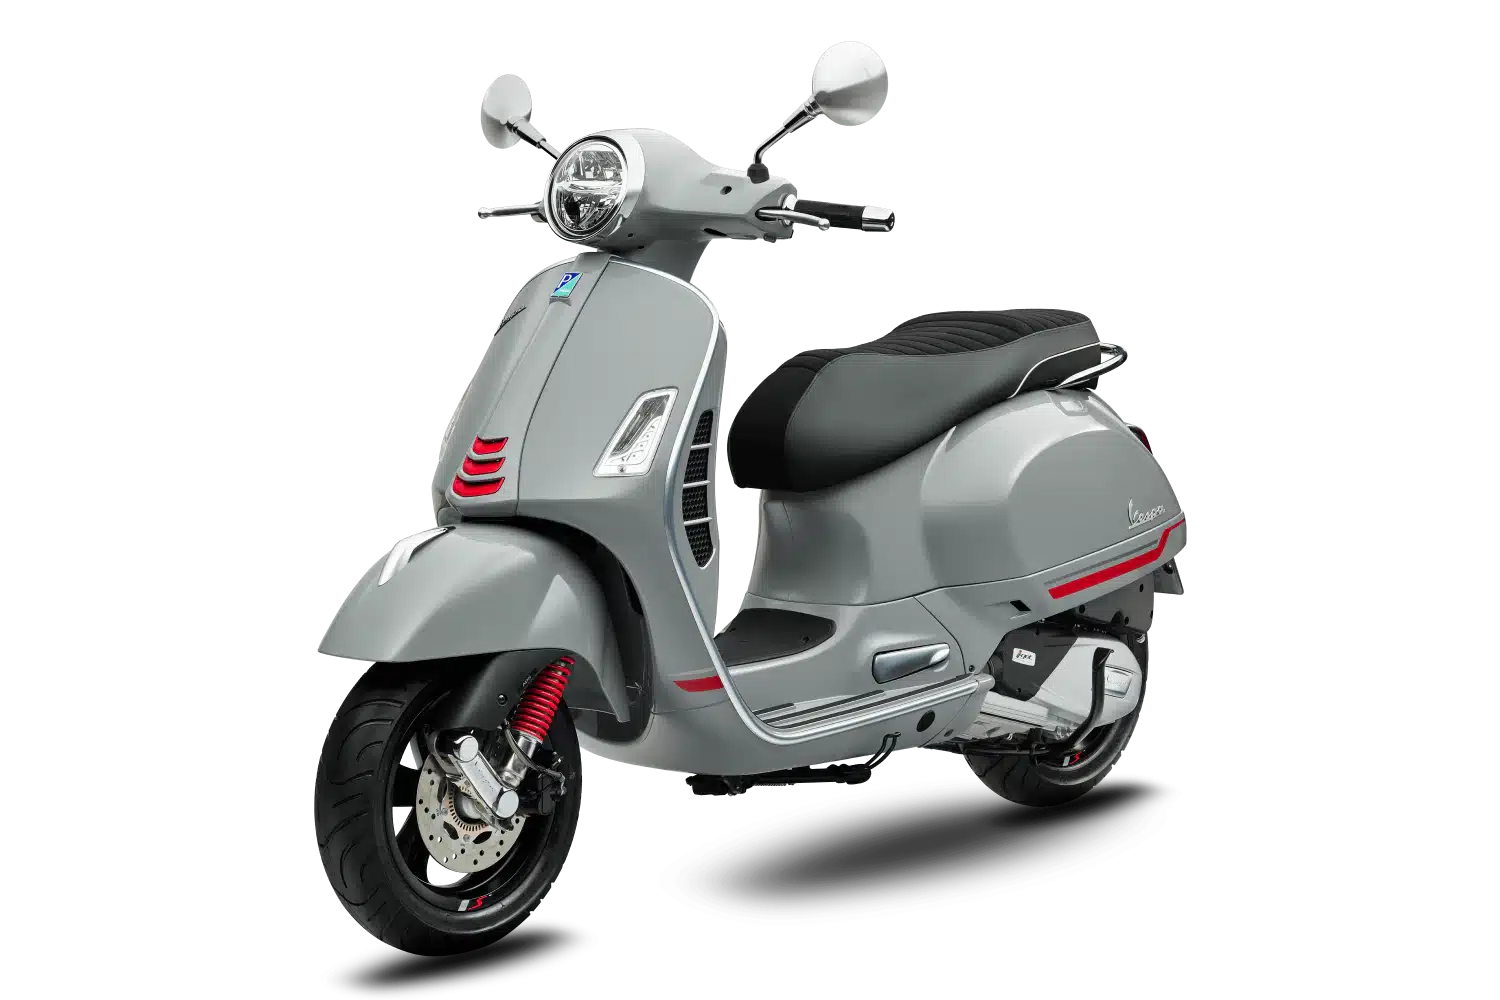 Discontinued Vespa GTS 150 300 Supersport Features & Specs